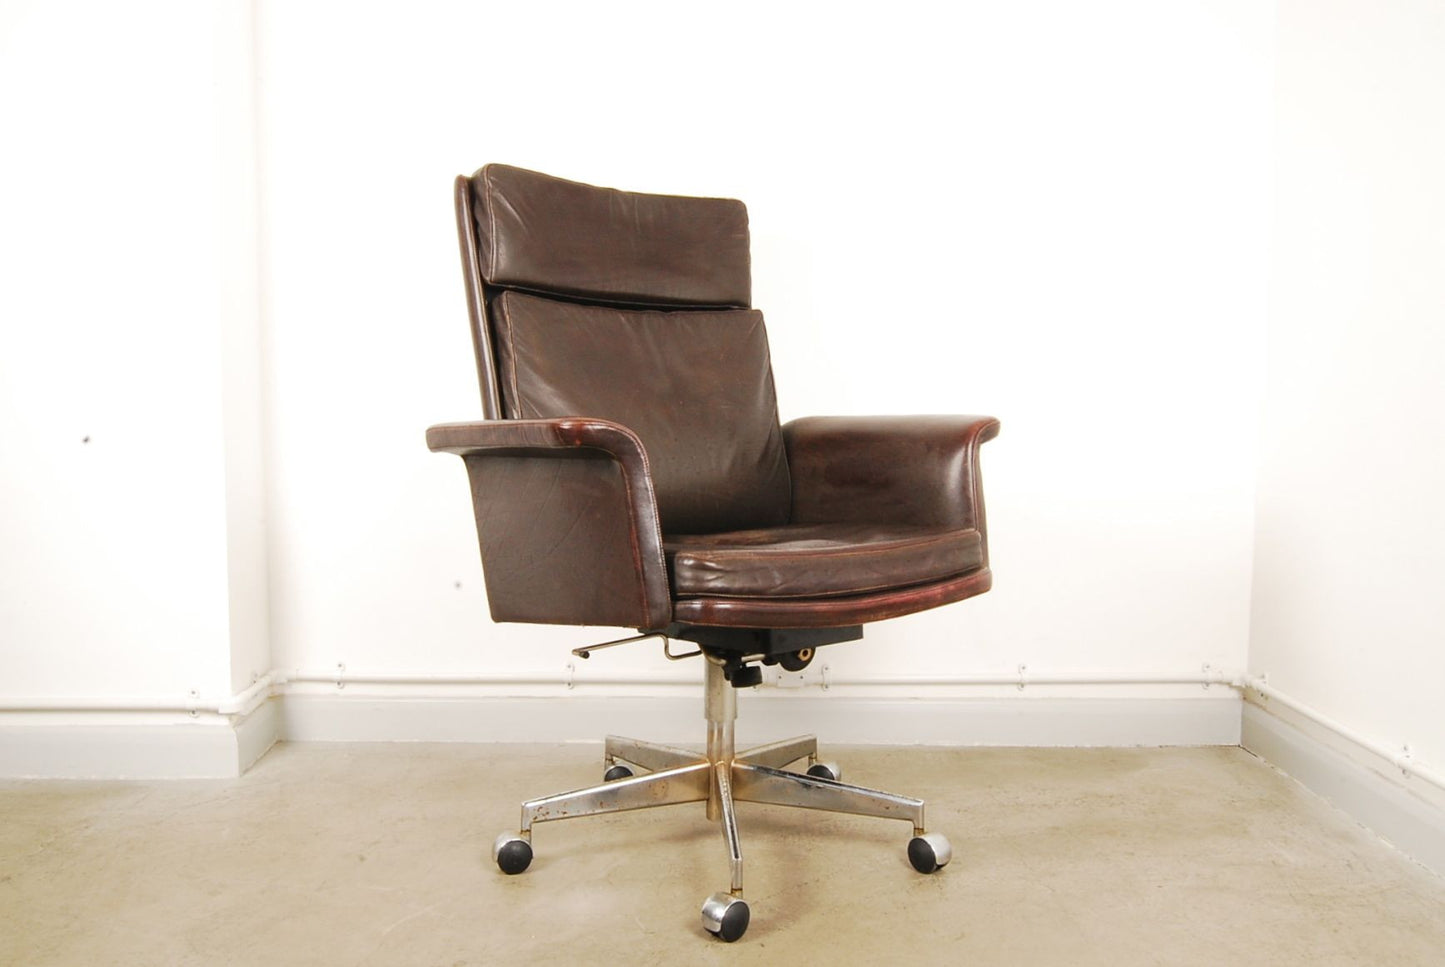 High back leather desk chair